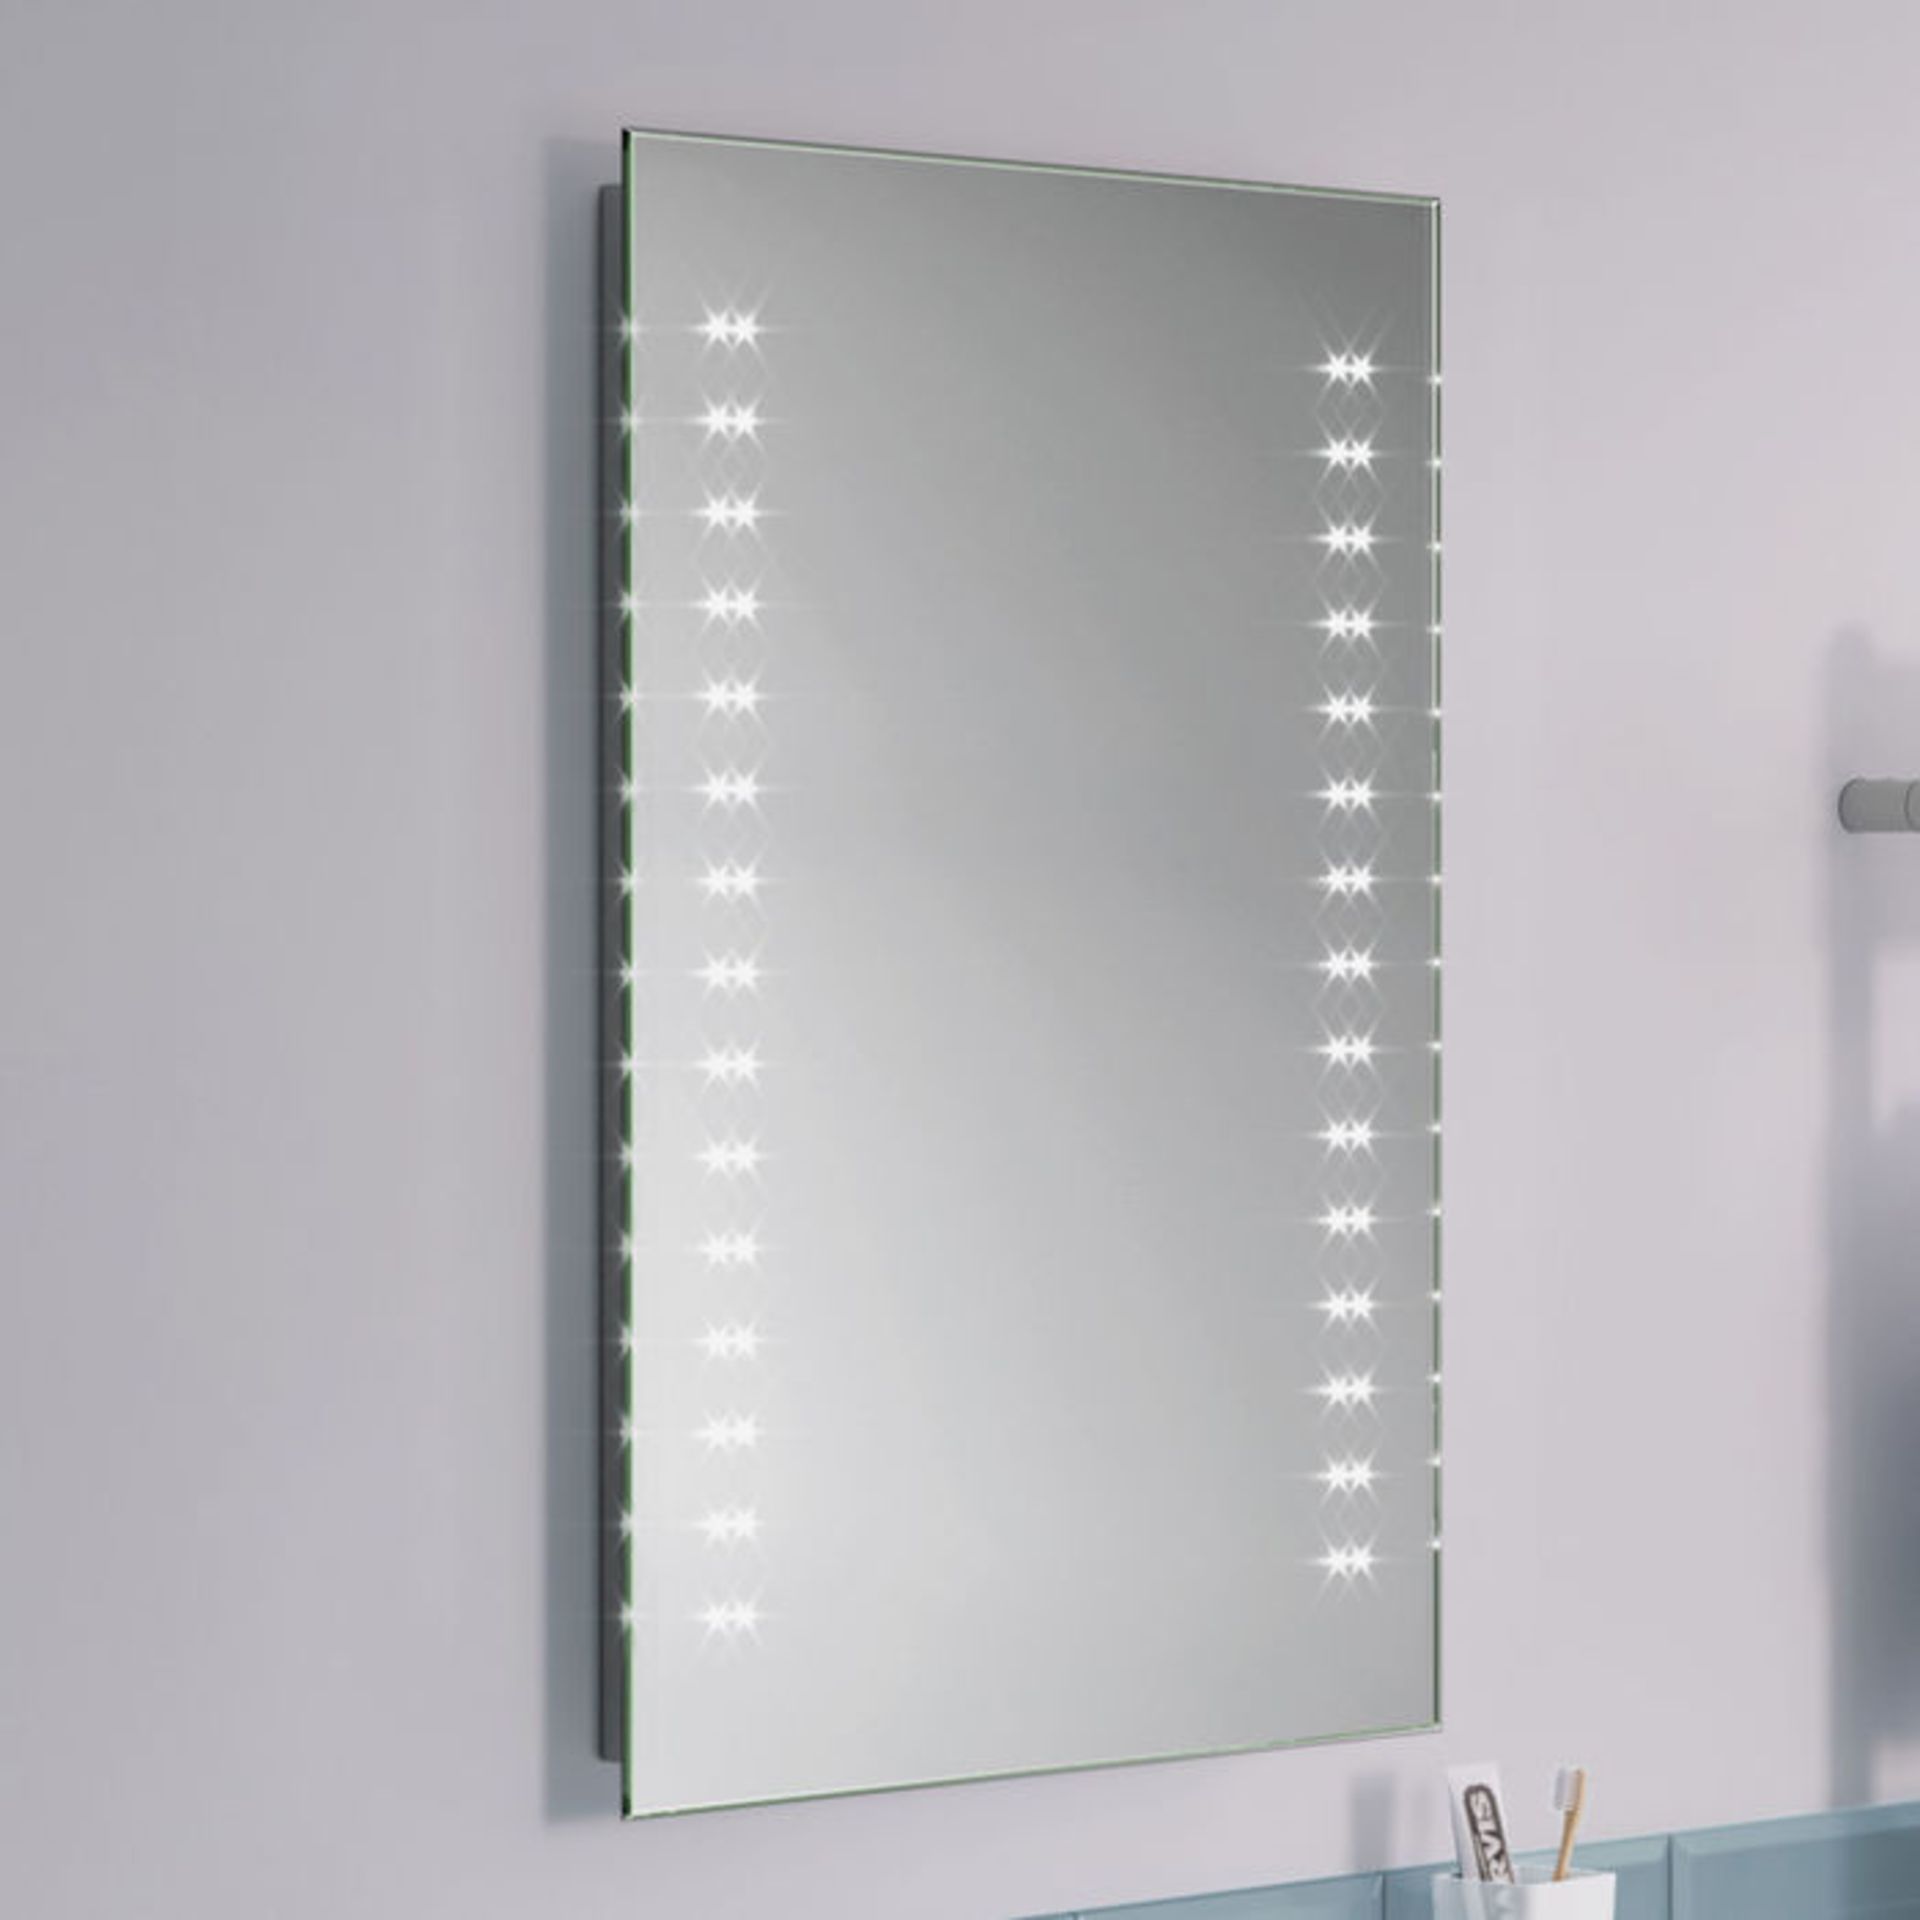 (HS95) 700x500mm Galactic Illuminated LED Mirror - Battery Operated. Energy saving controlled On / - Image 2 of 4